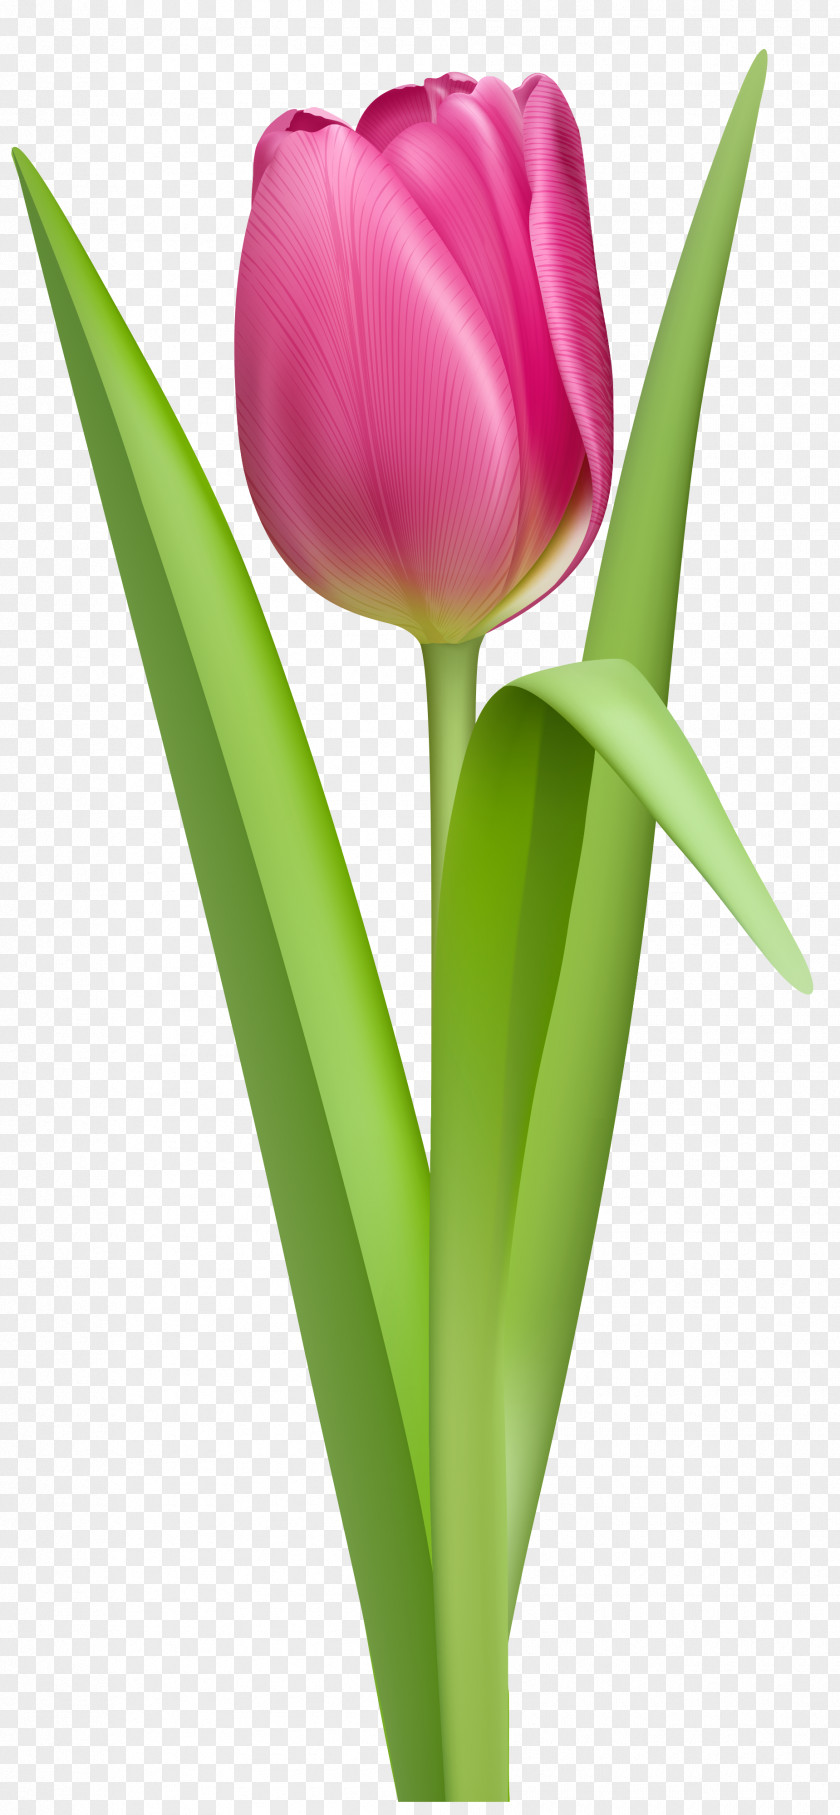 Transparent Pink Tulip Clipart Picture The Tulip: Story Of A Flower That Has Made Men Mad Computer File PNG